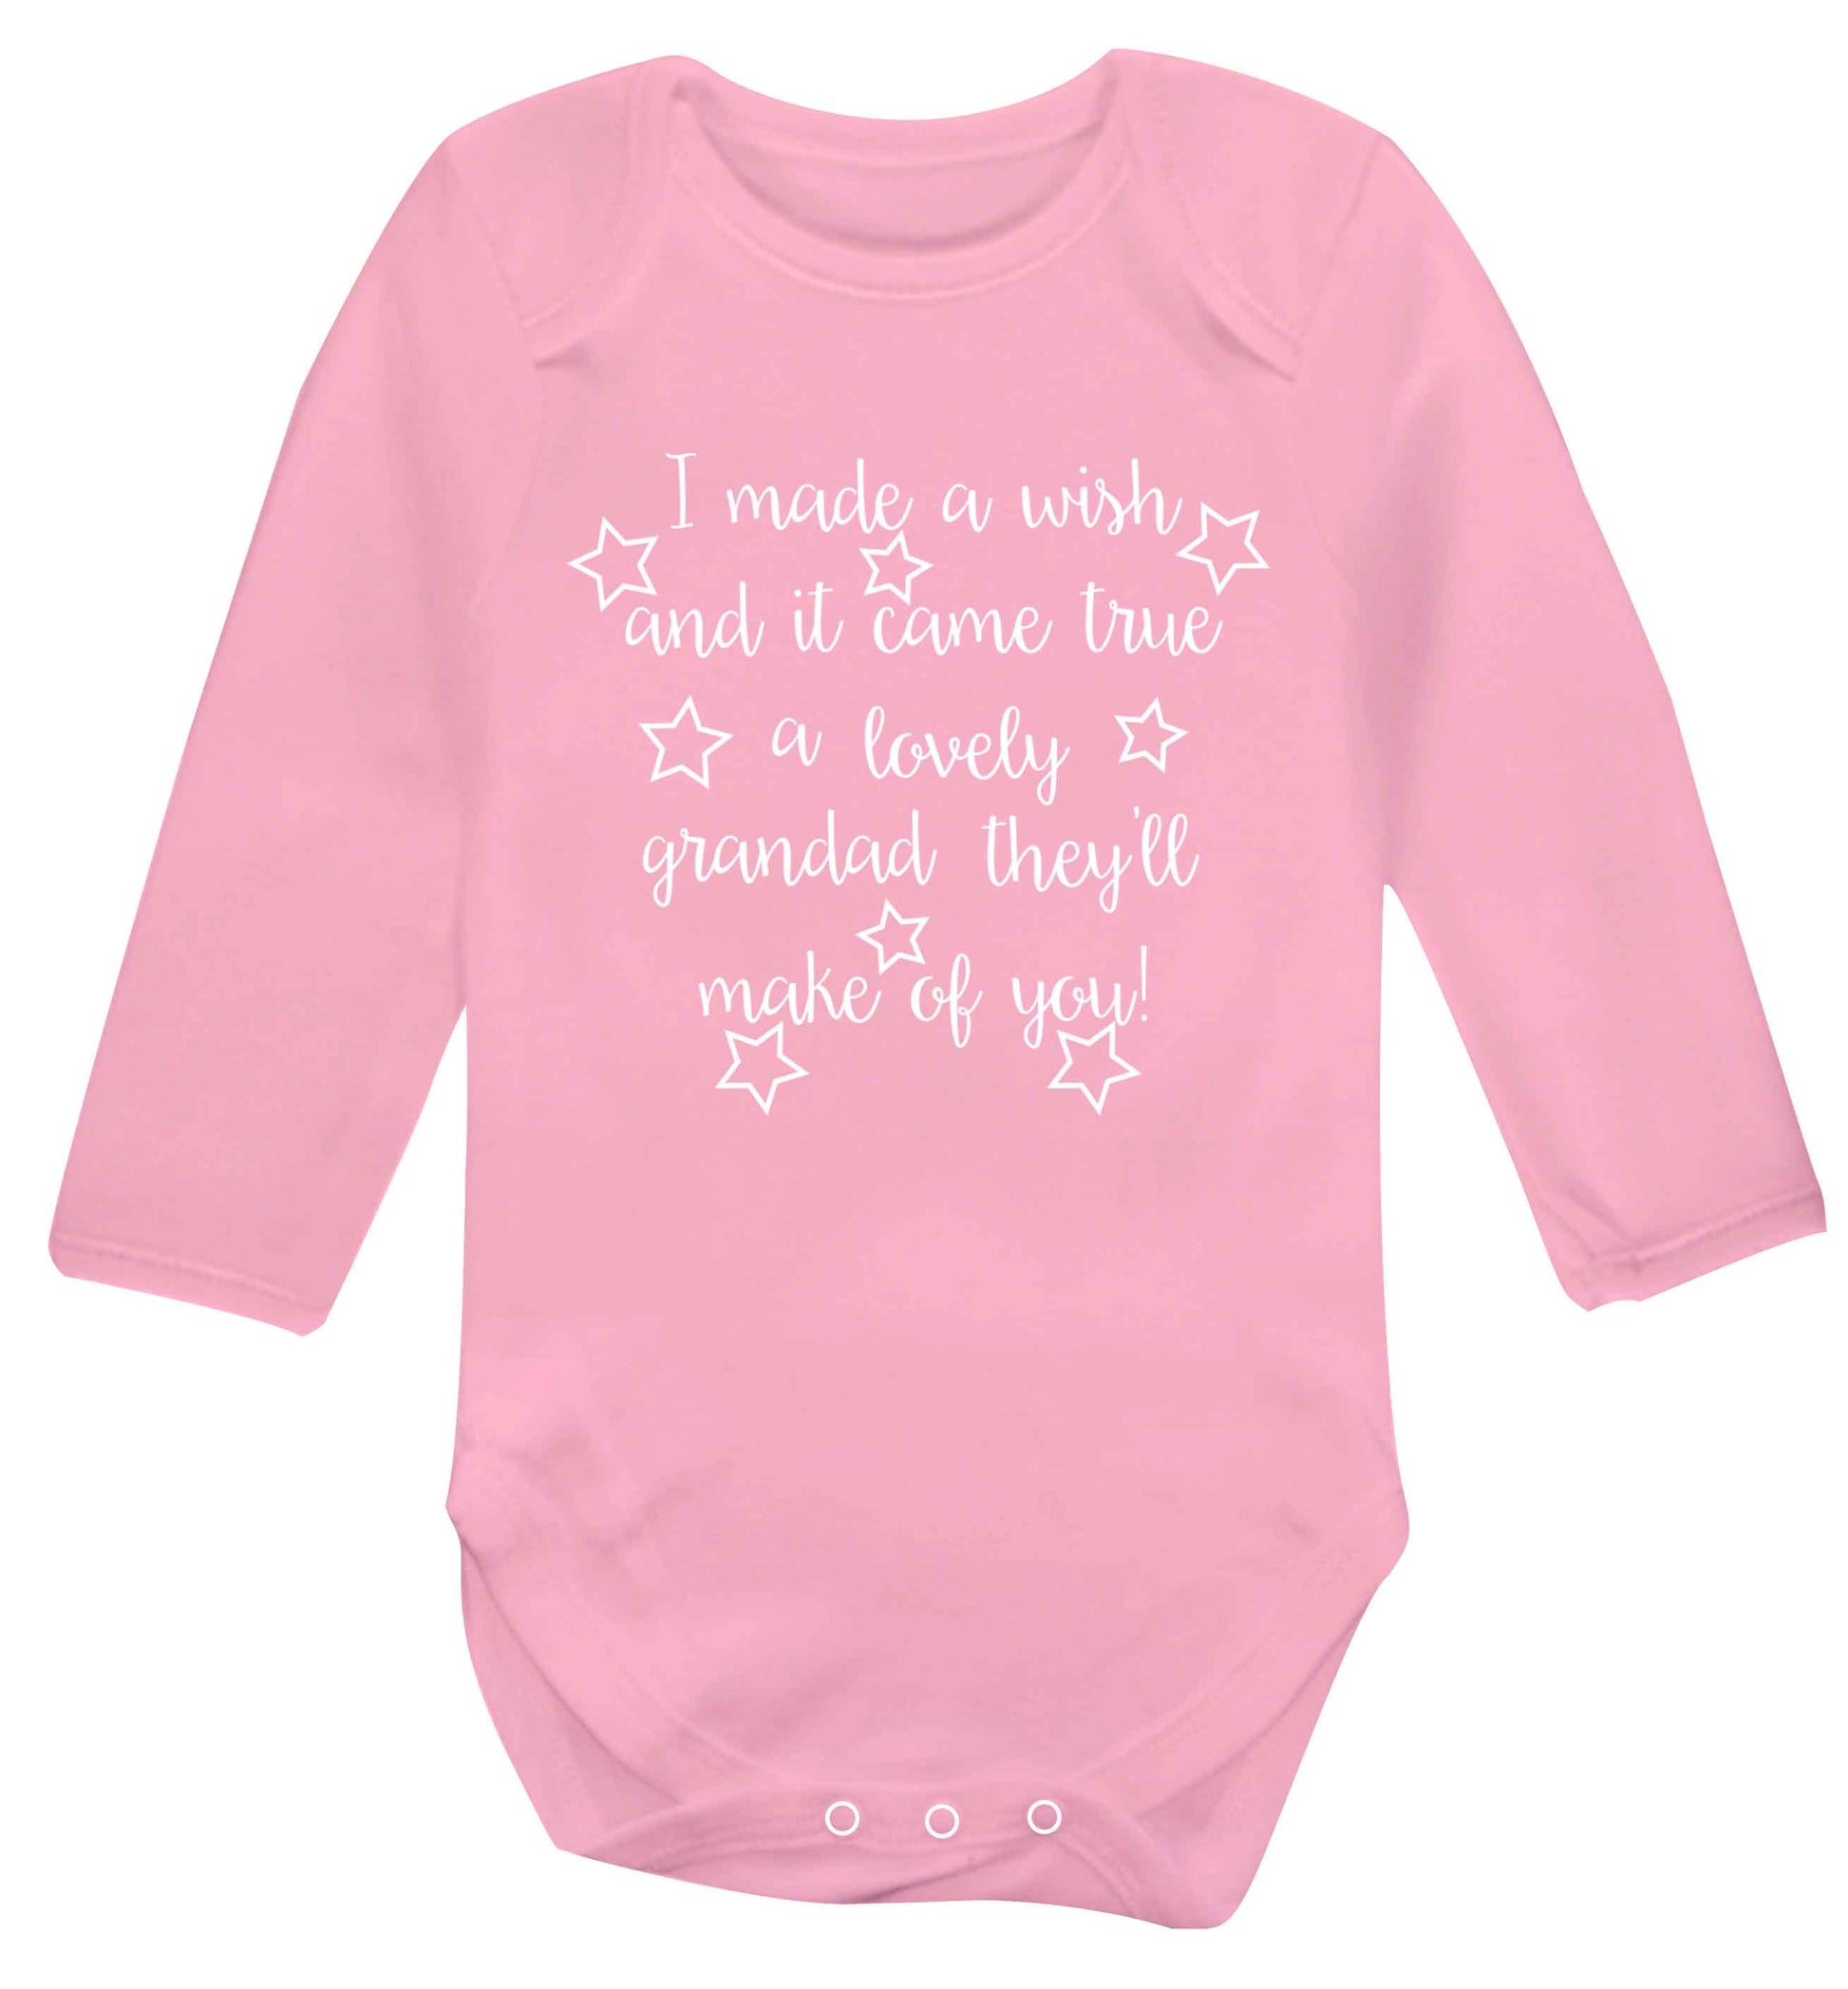 I made a wish and it came true a lovely grandad they'll make of you! Baby Vest long sleeved pale pink 6-12 months